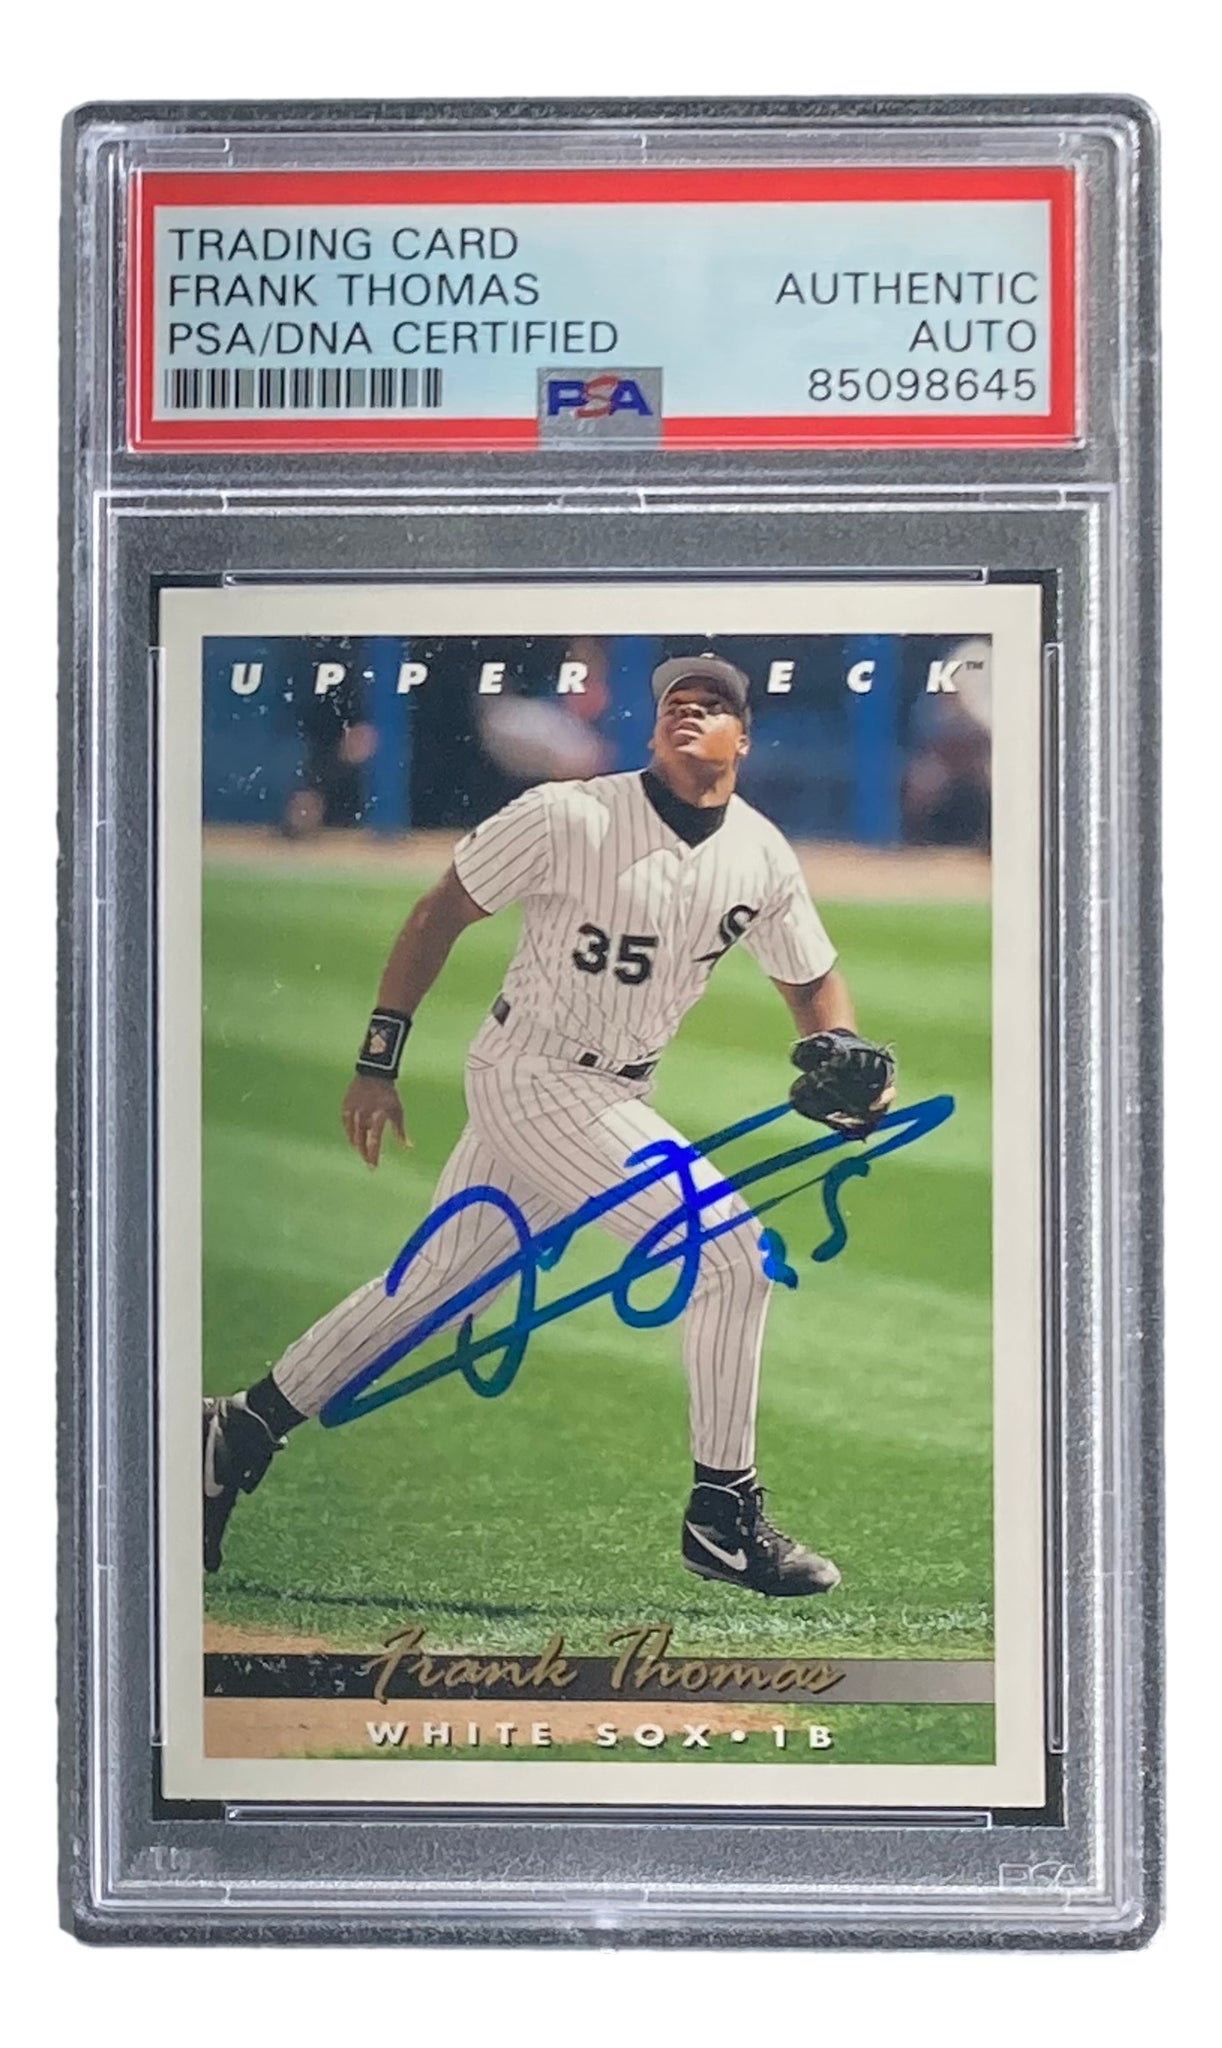 Frank Thomas Signed 1993 Upper Deck #555 Chicago White Sox Trading Card PSA/DNA